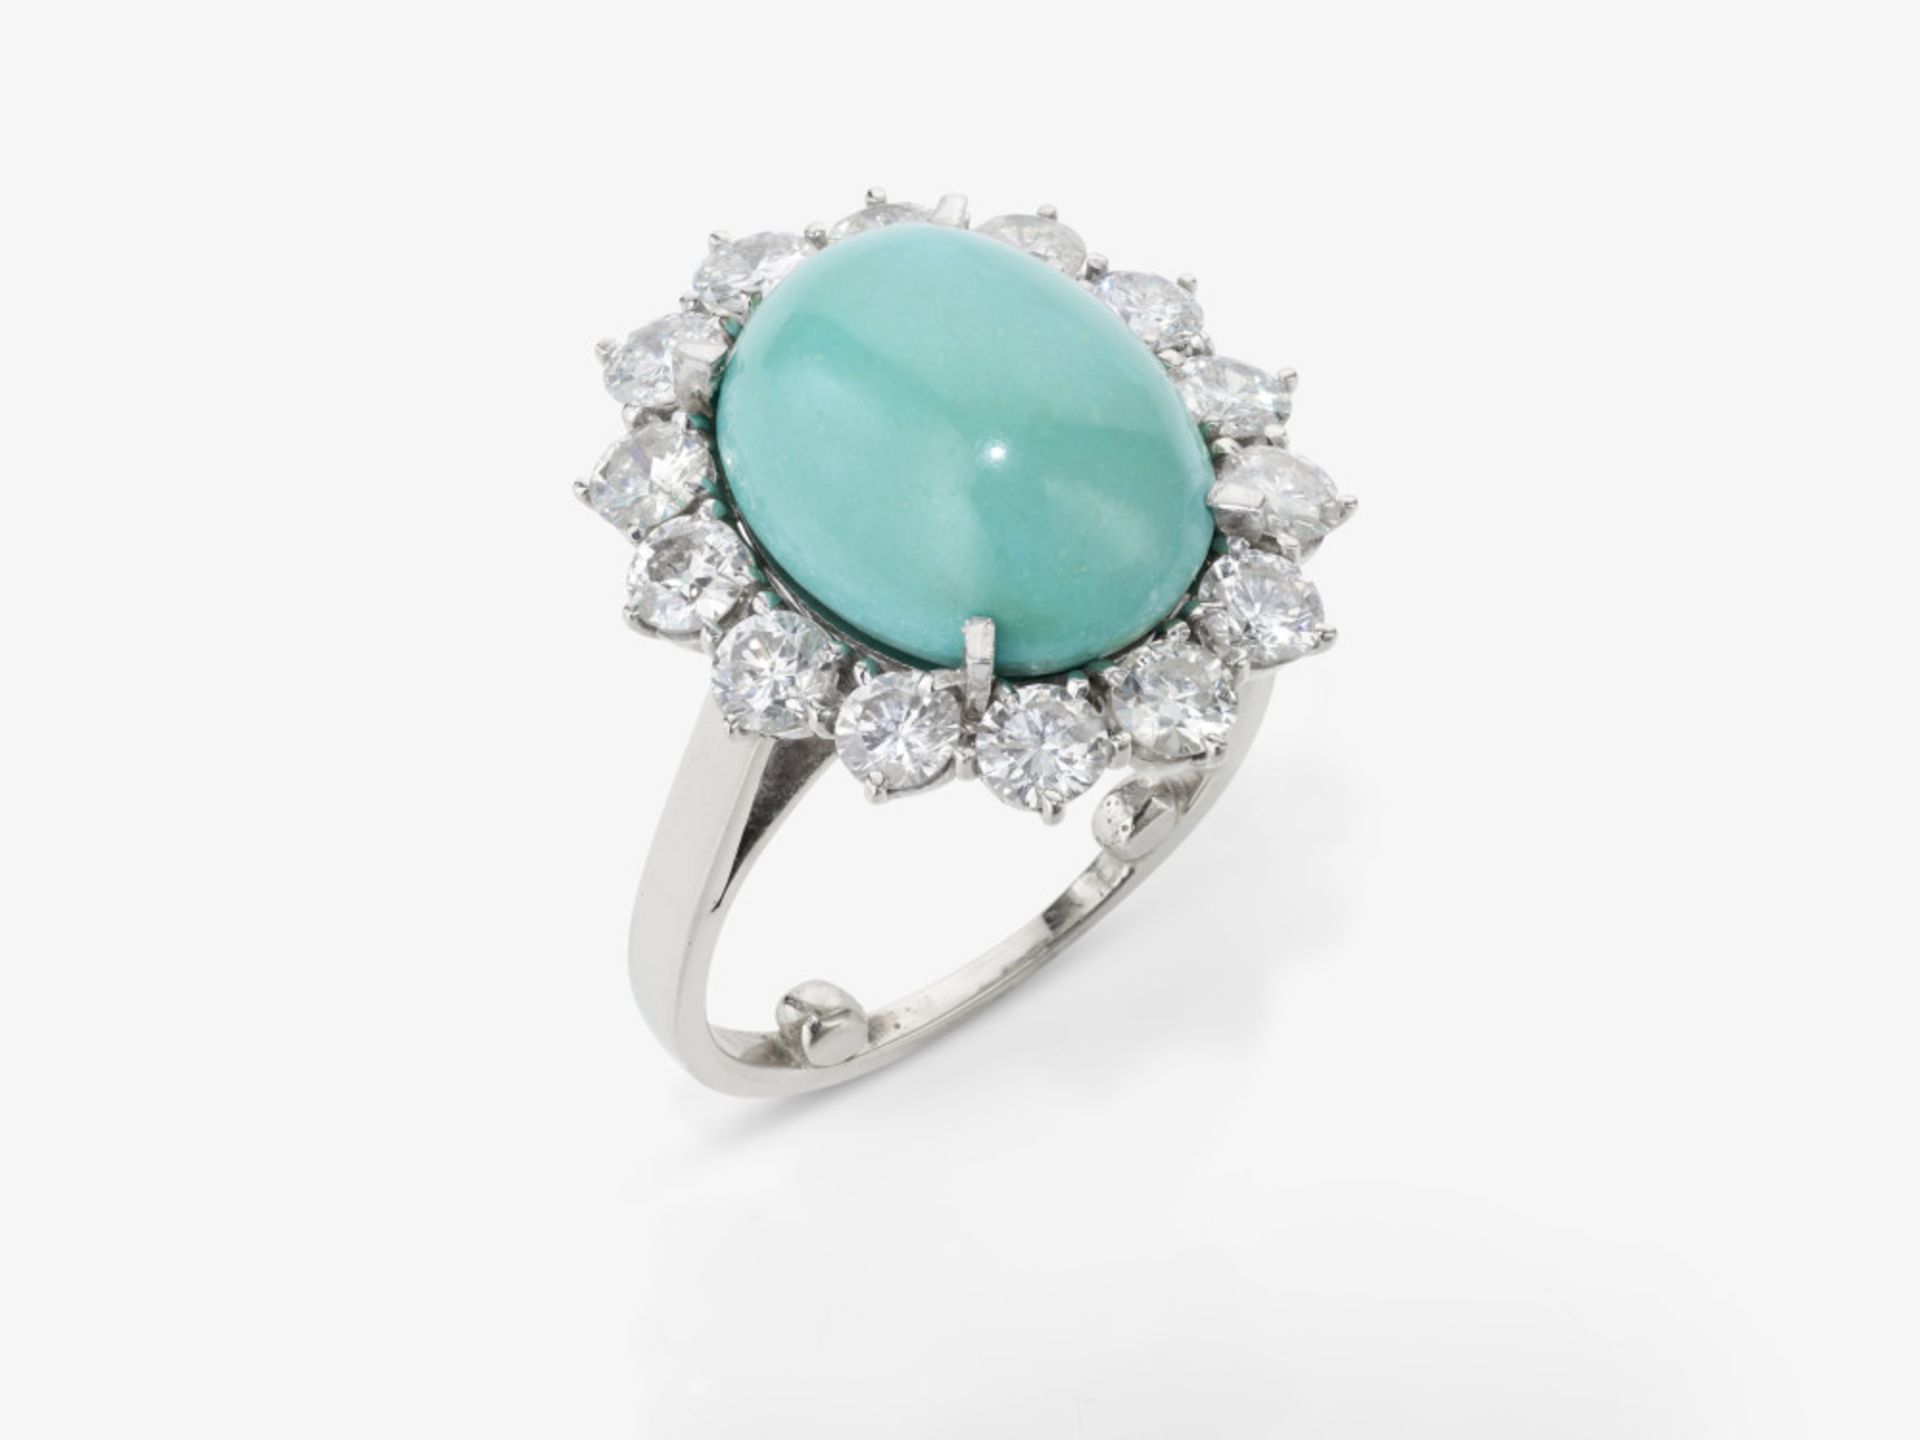 An Entourage ring with a turquoise and brilliant-cut diamonds